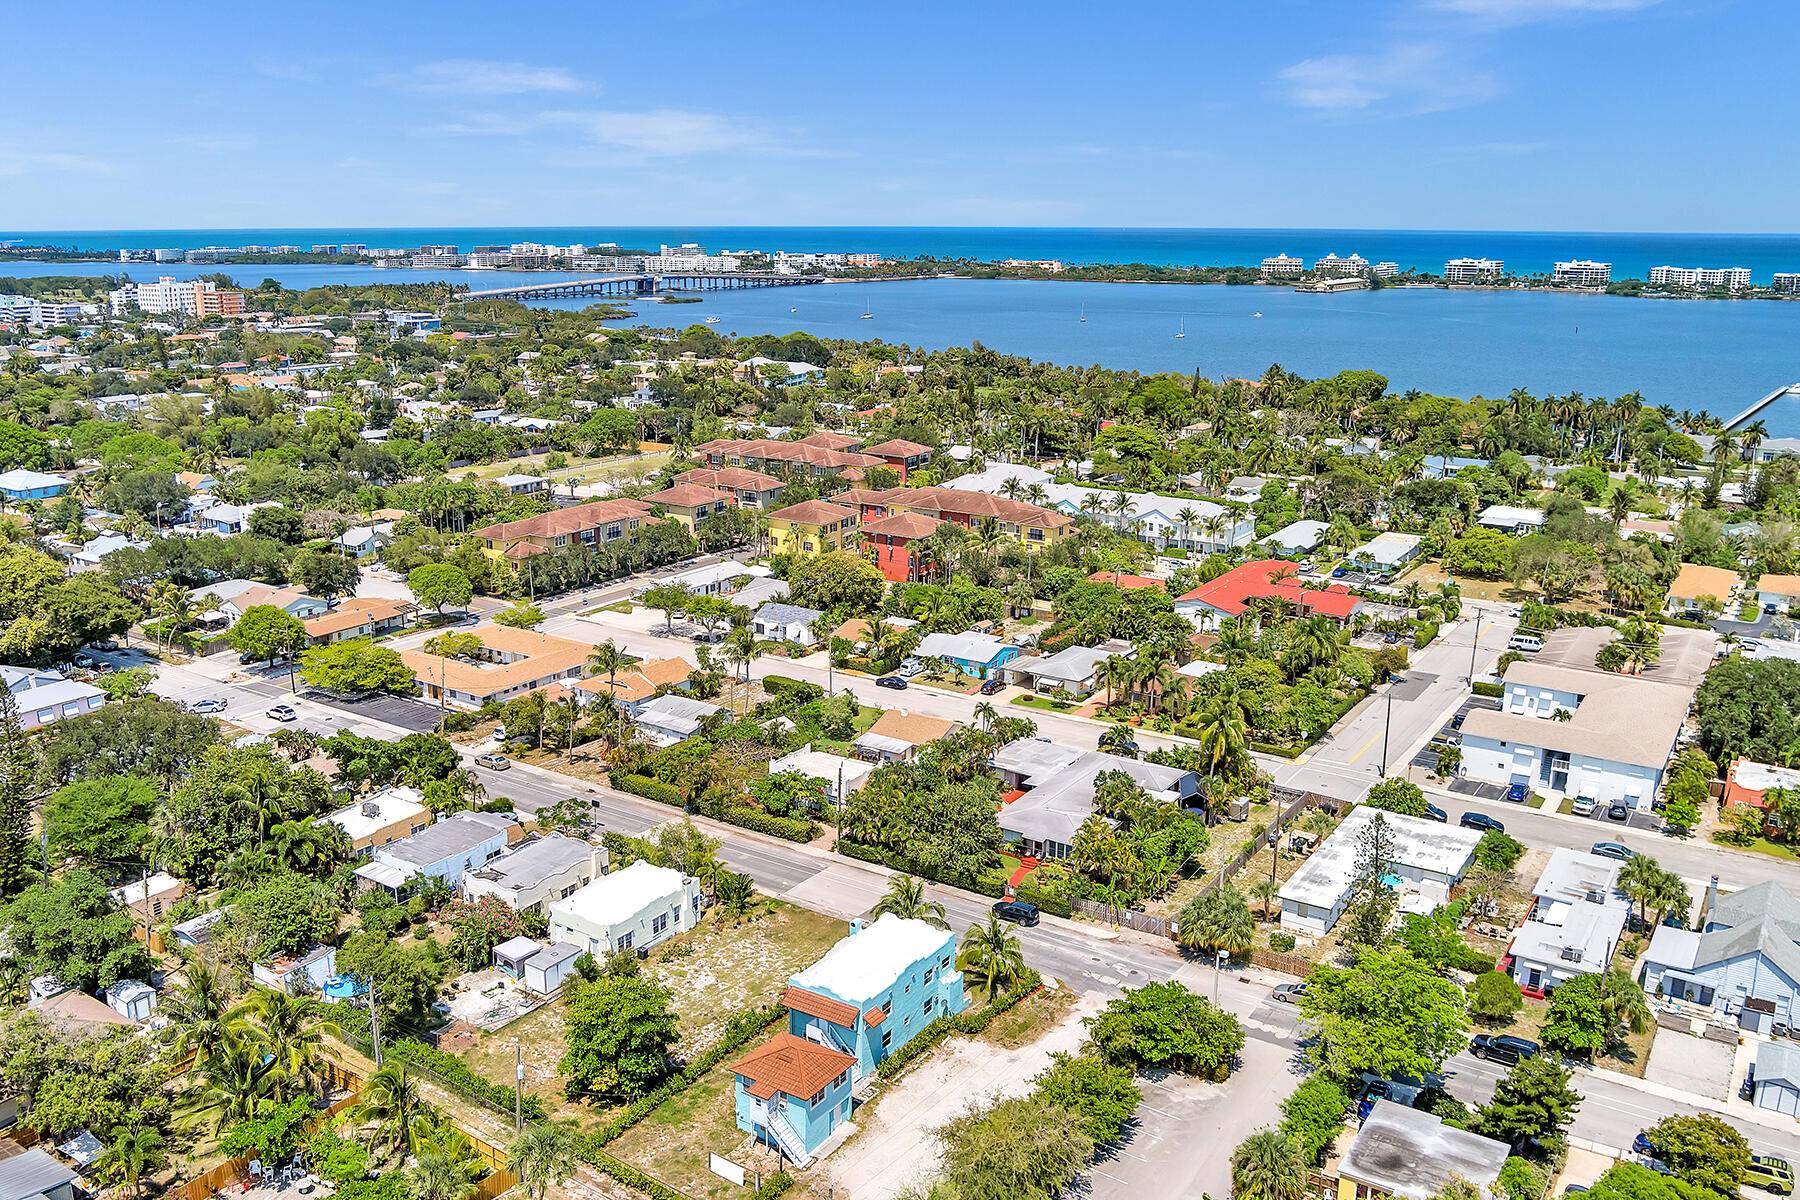 Schedule your appointment today with 24 hour notice to see this amazing corner lot investment opportunity in Lake Worth beach !